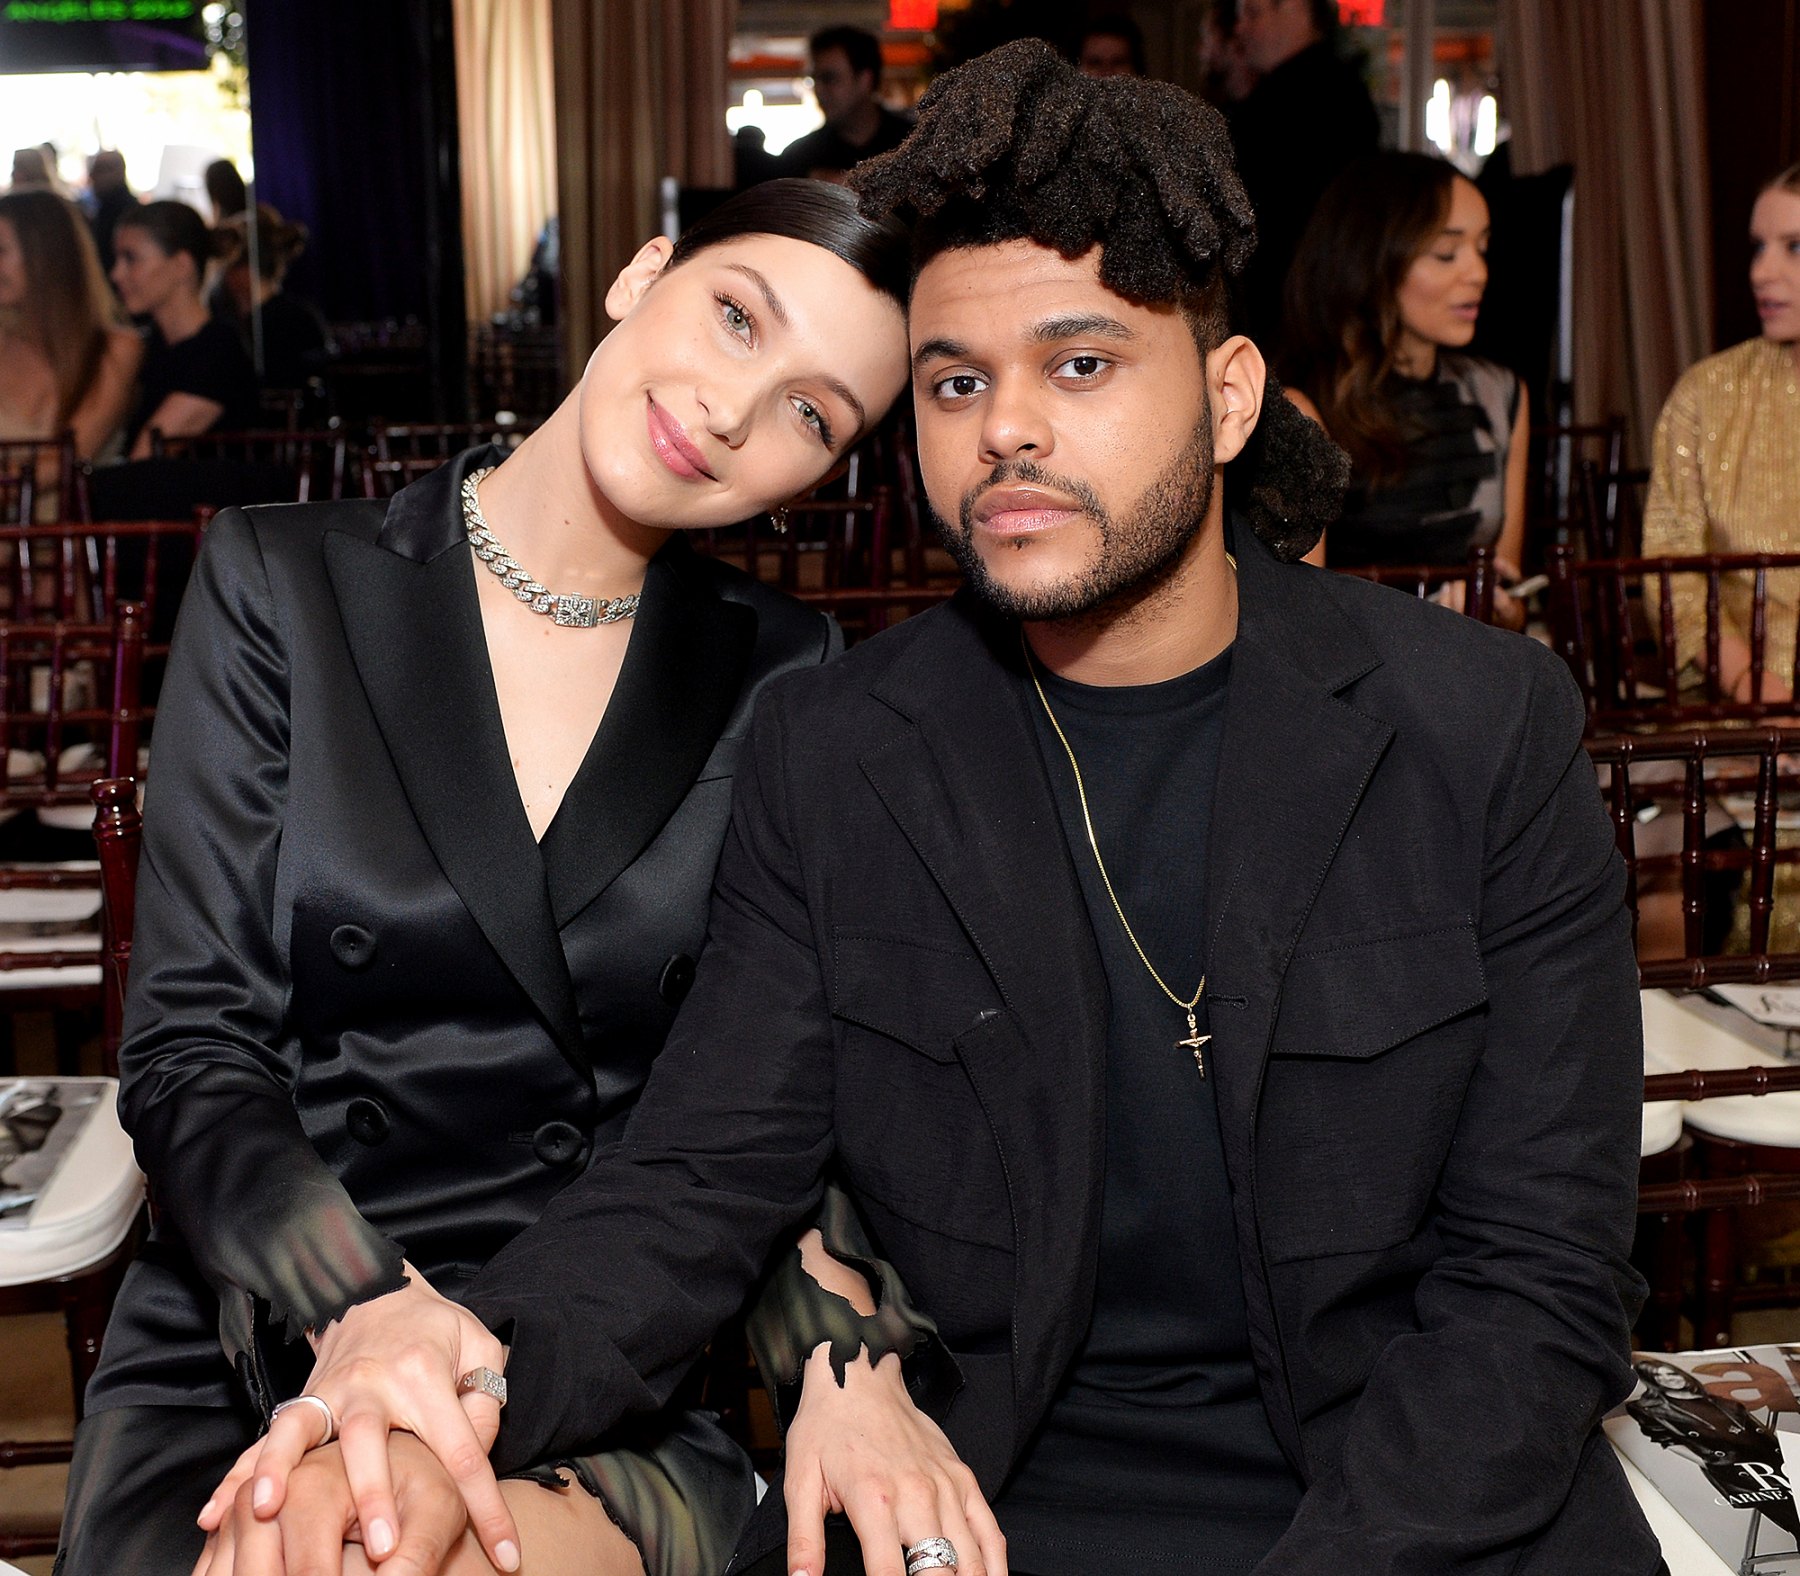 Bella Hadid and The Weeknd’s Relationship Timeline